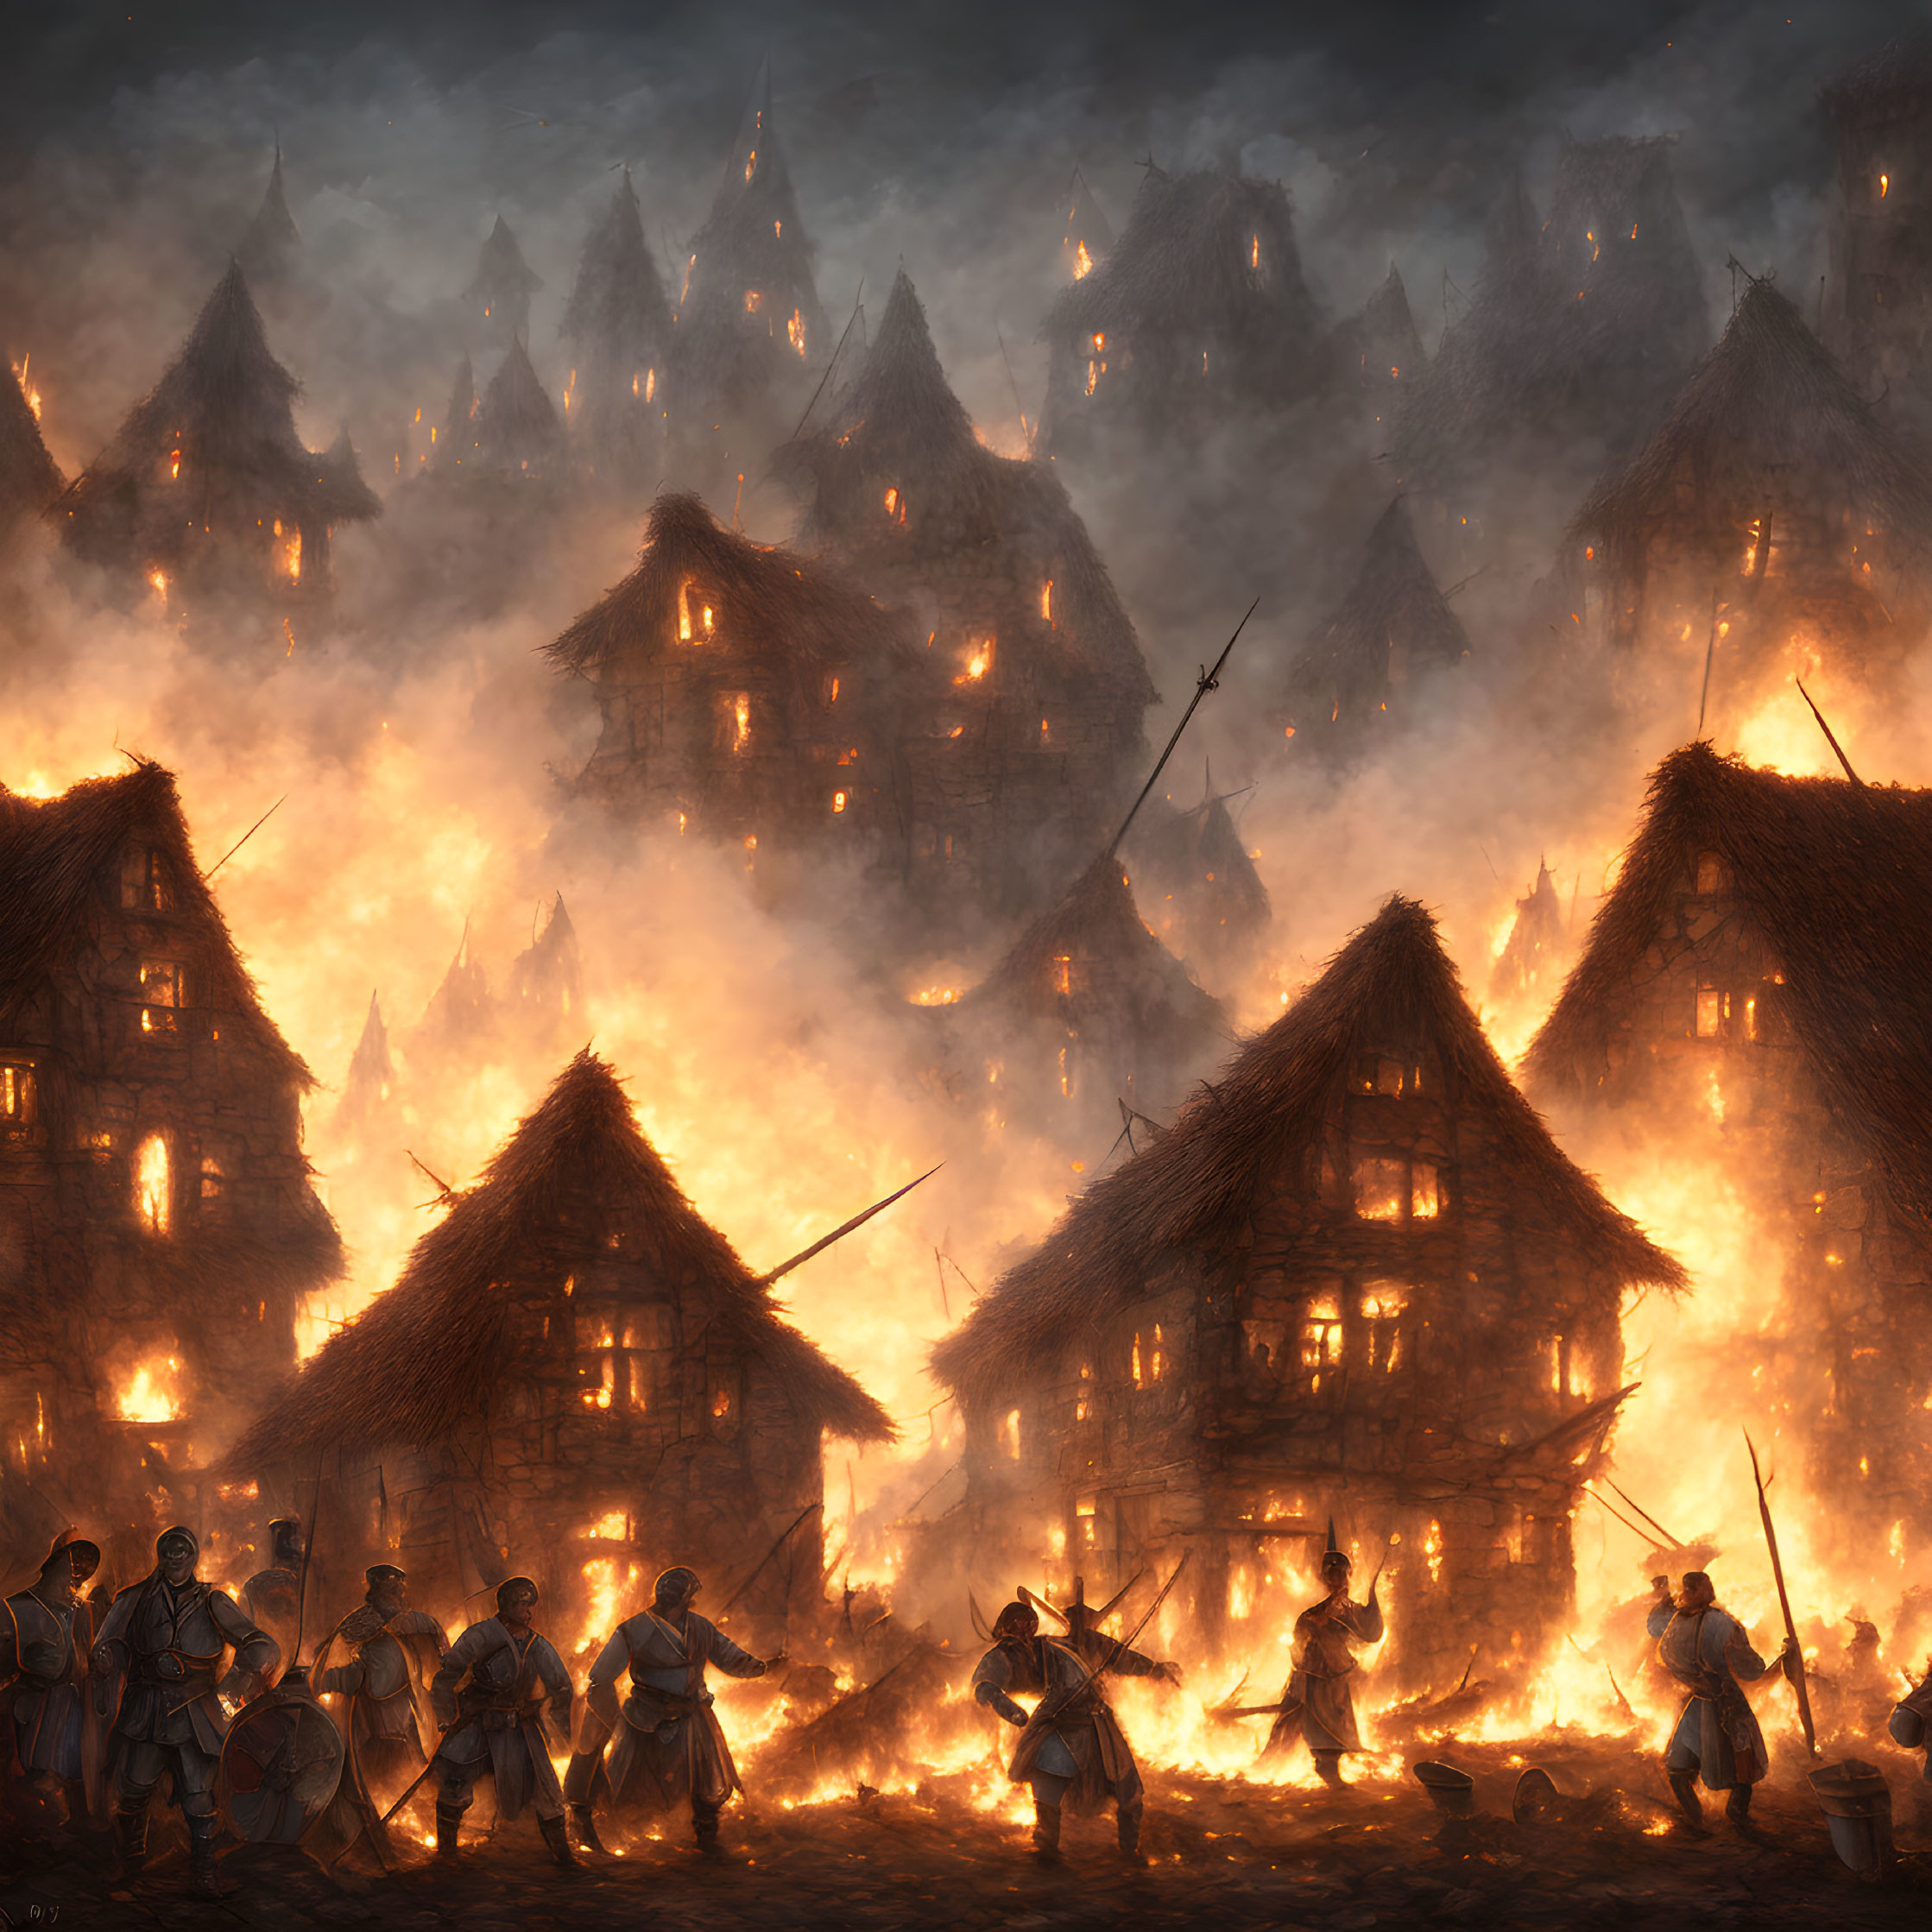 Medieval village night scene with armed figures and burning thatched roofs